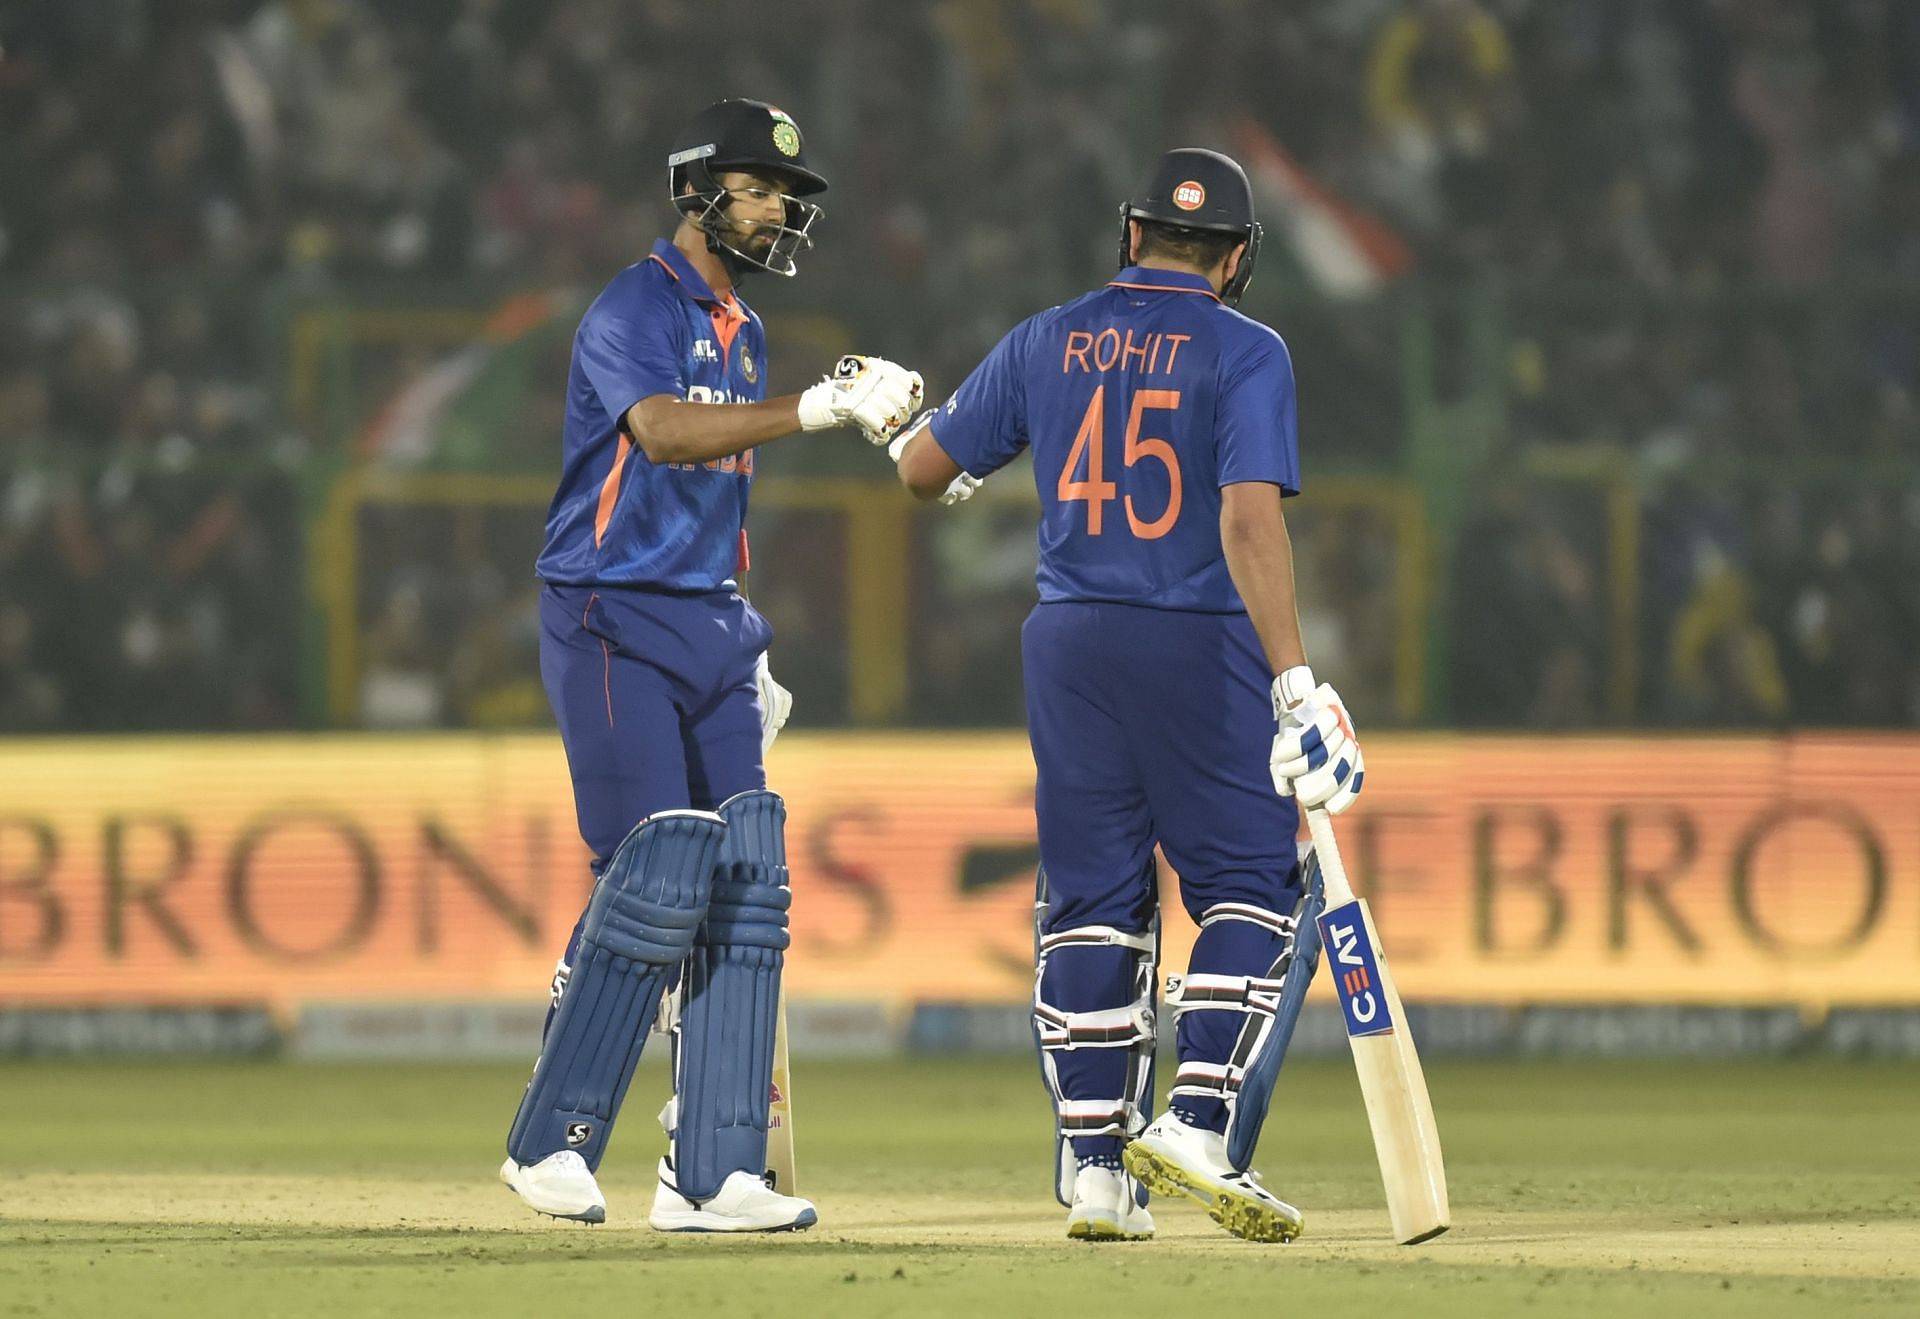 Rohit Sharma and KL Rahul gave Team India a flying start